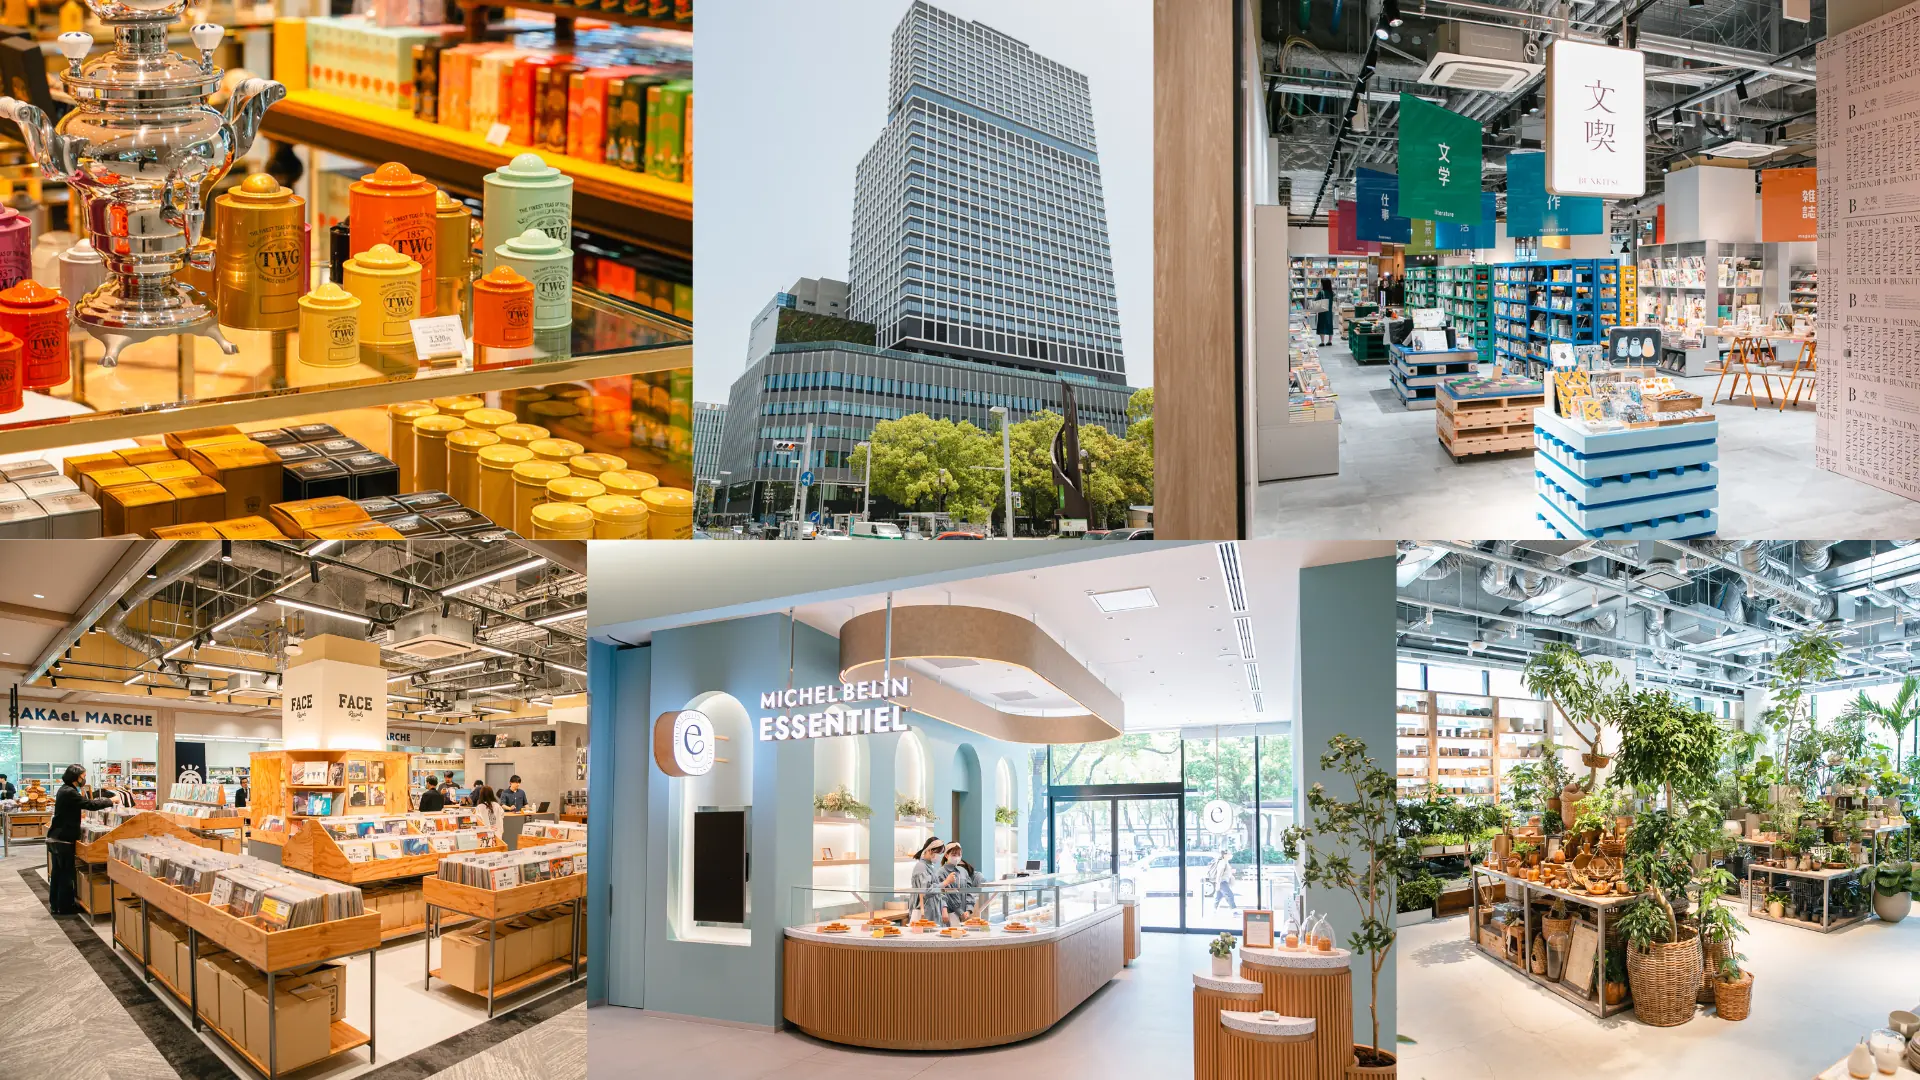 [Chunichi Building Report] 93 New Stores, Including Nagoya Firsts!